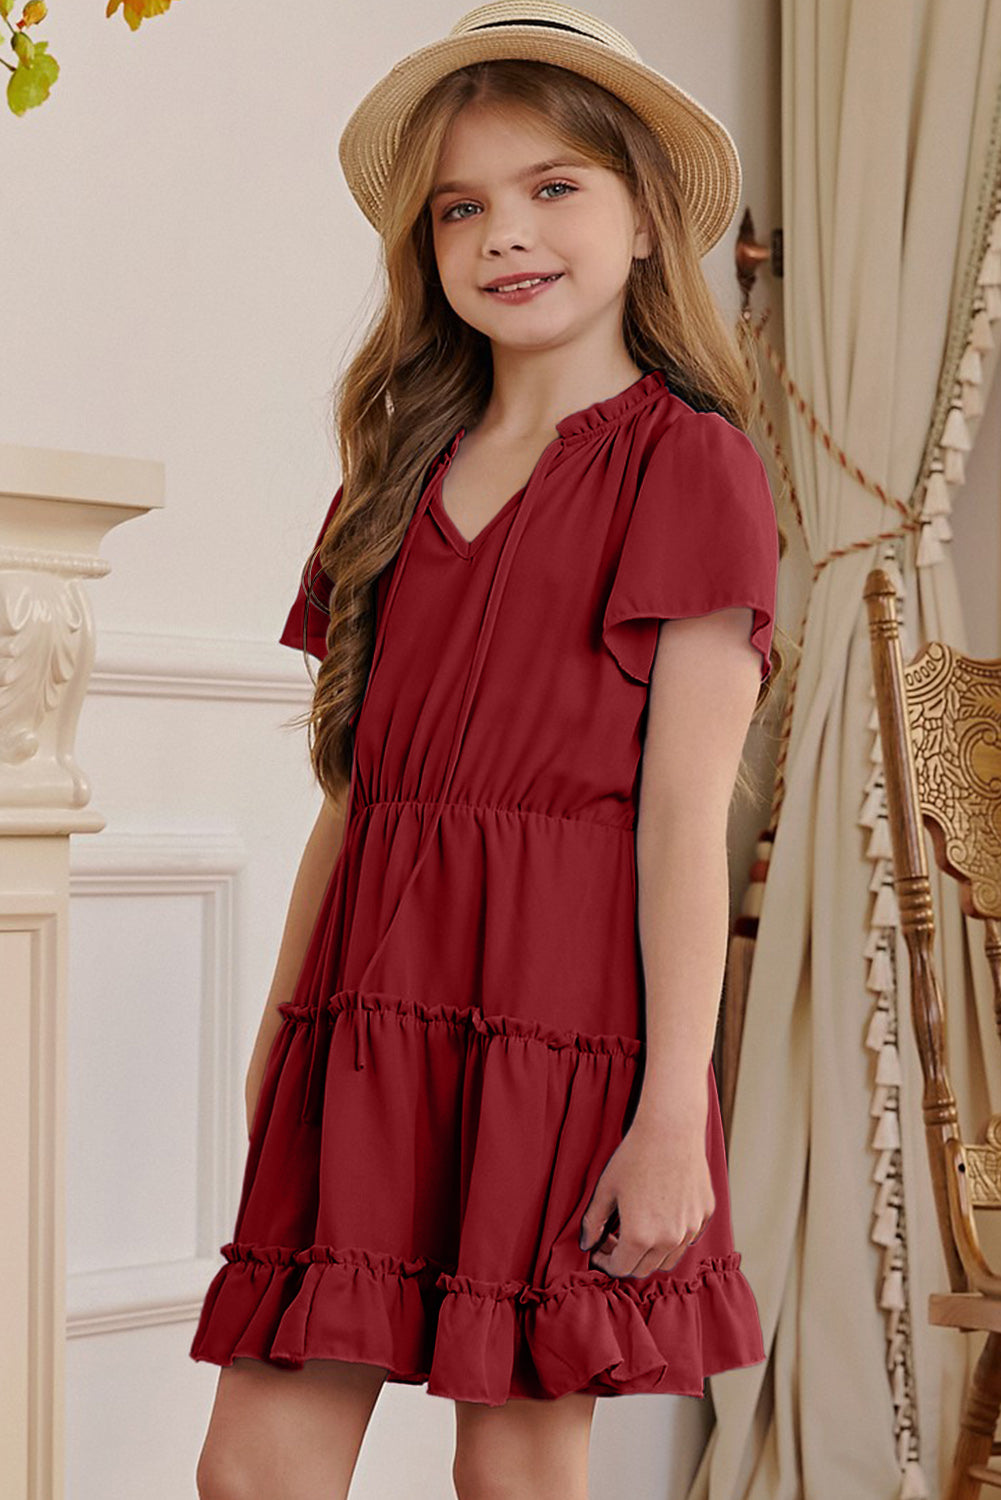 YOUTH GIRLS Frilled Notched Neck Puff Sleeve Dress SZ 4T-12Y